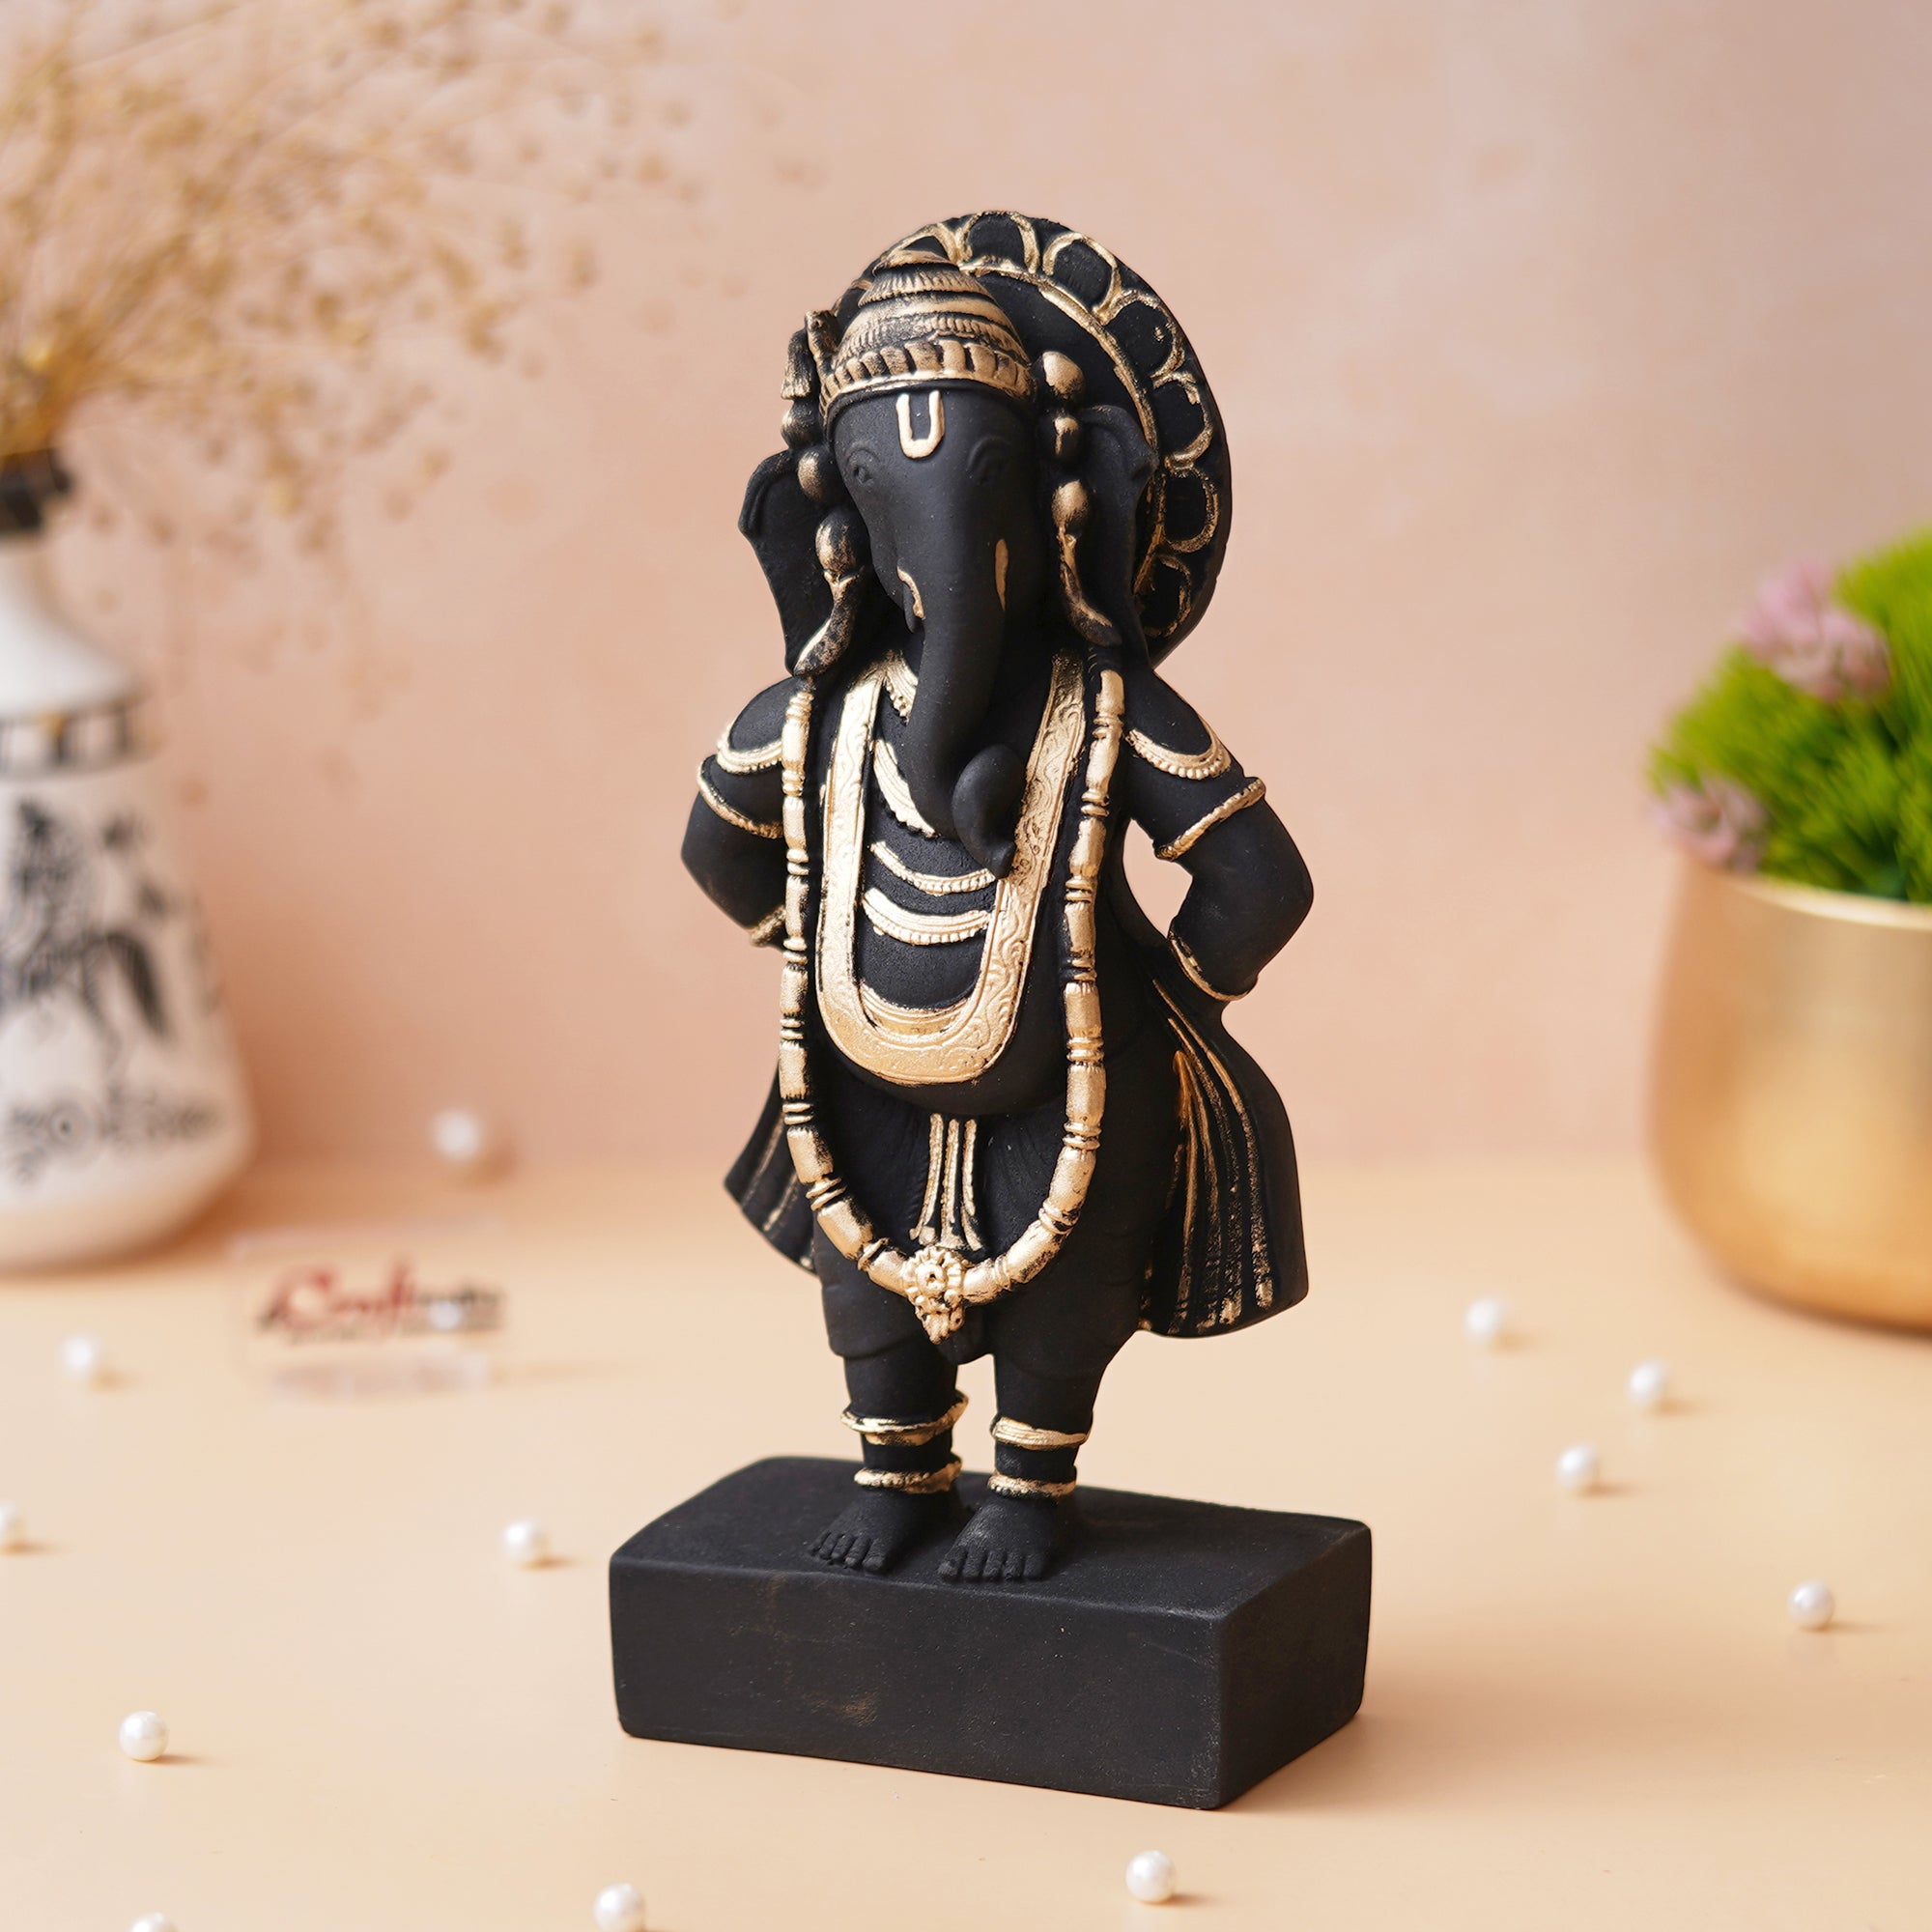 Black & Golden Polyresin Handcrafted Standing Lord Ganesha Statue 5